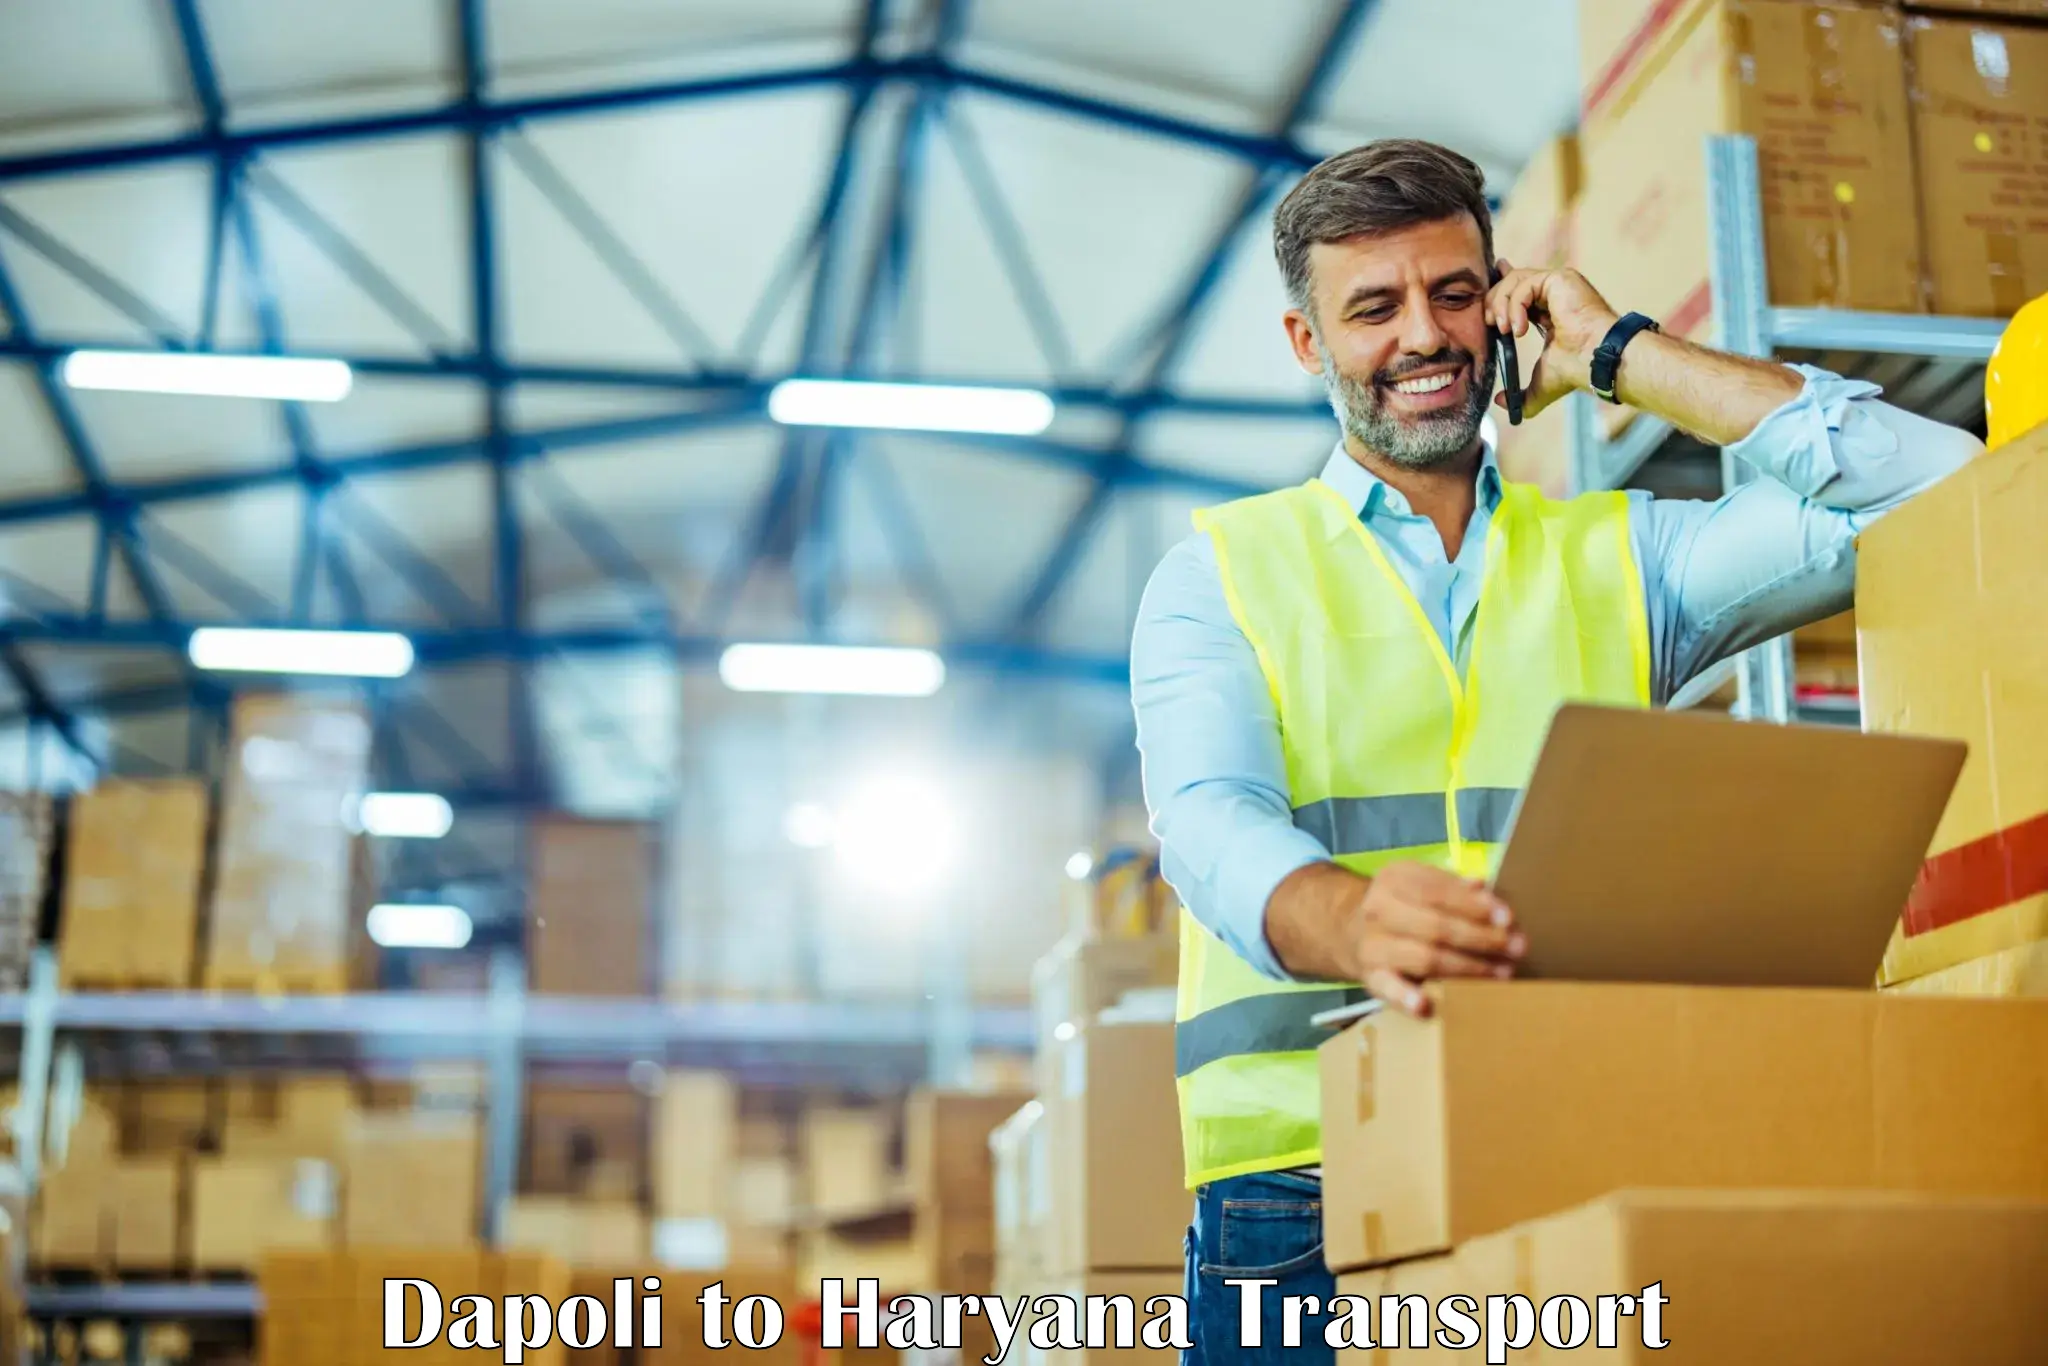 Daily transport service Dapoli to Sonipat